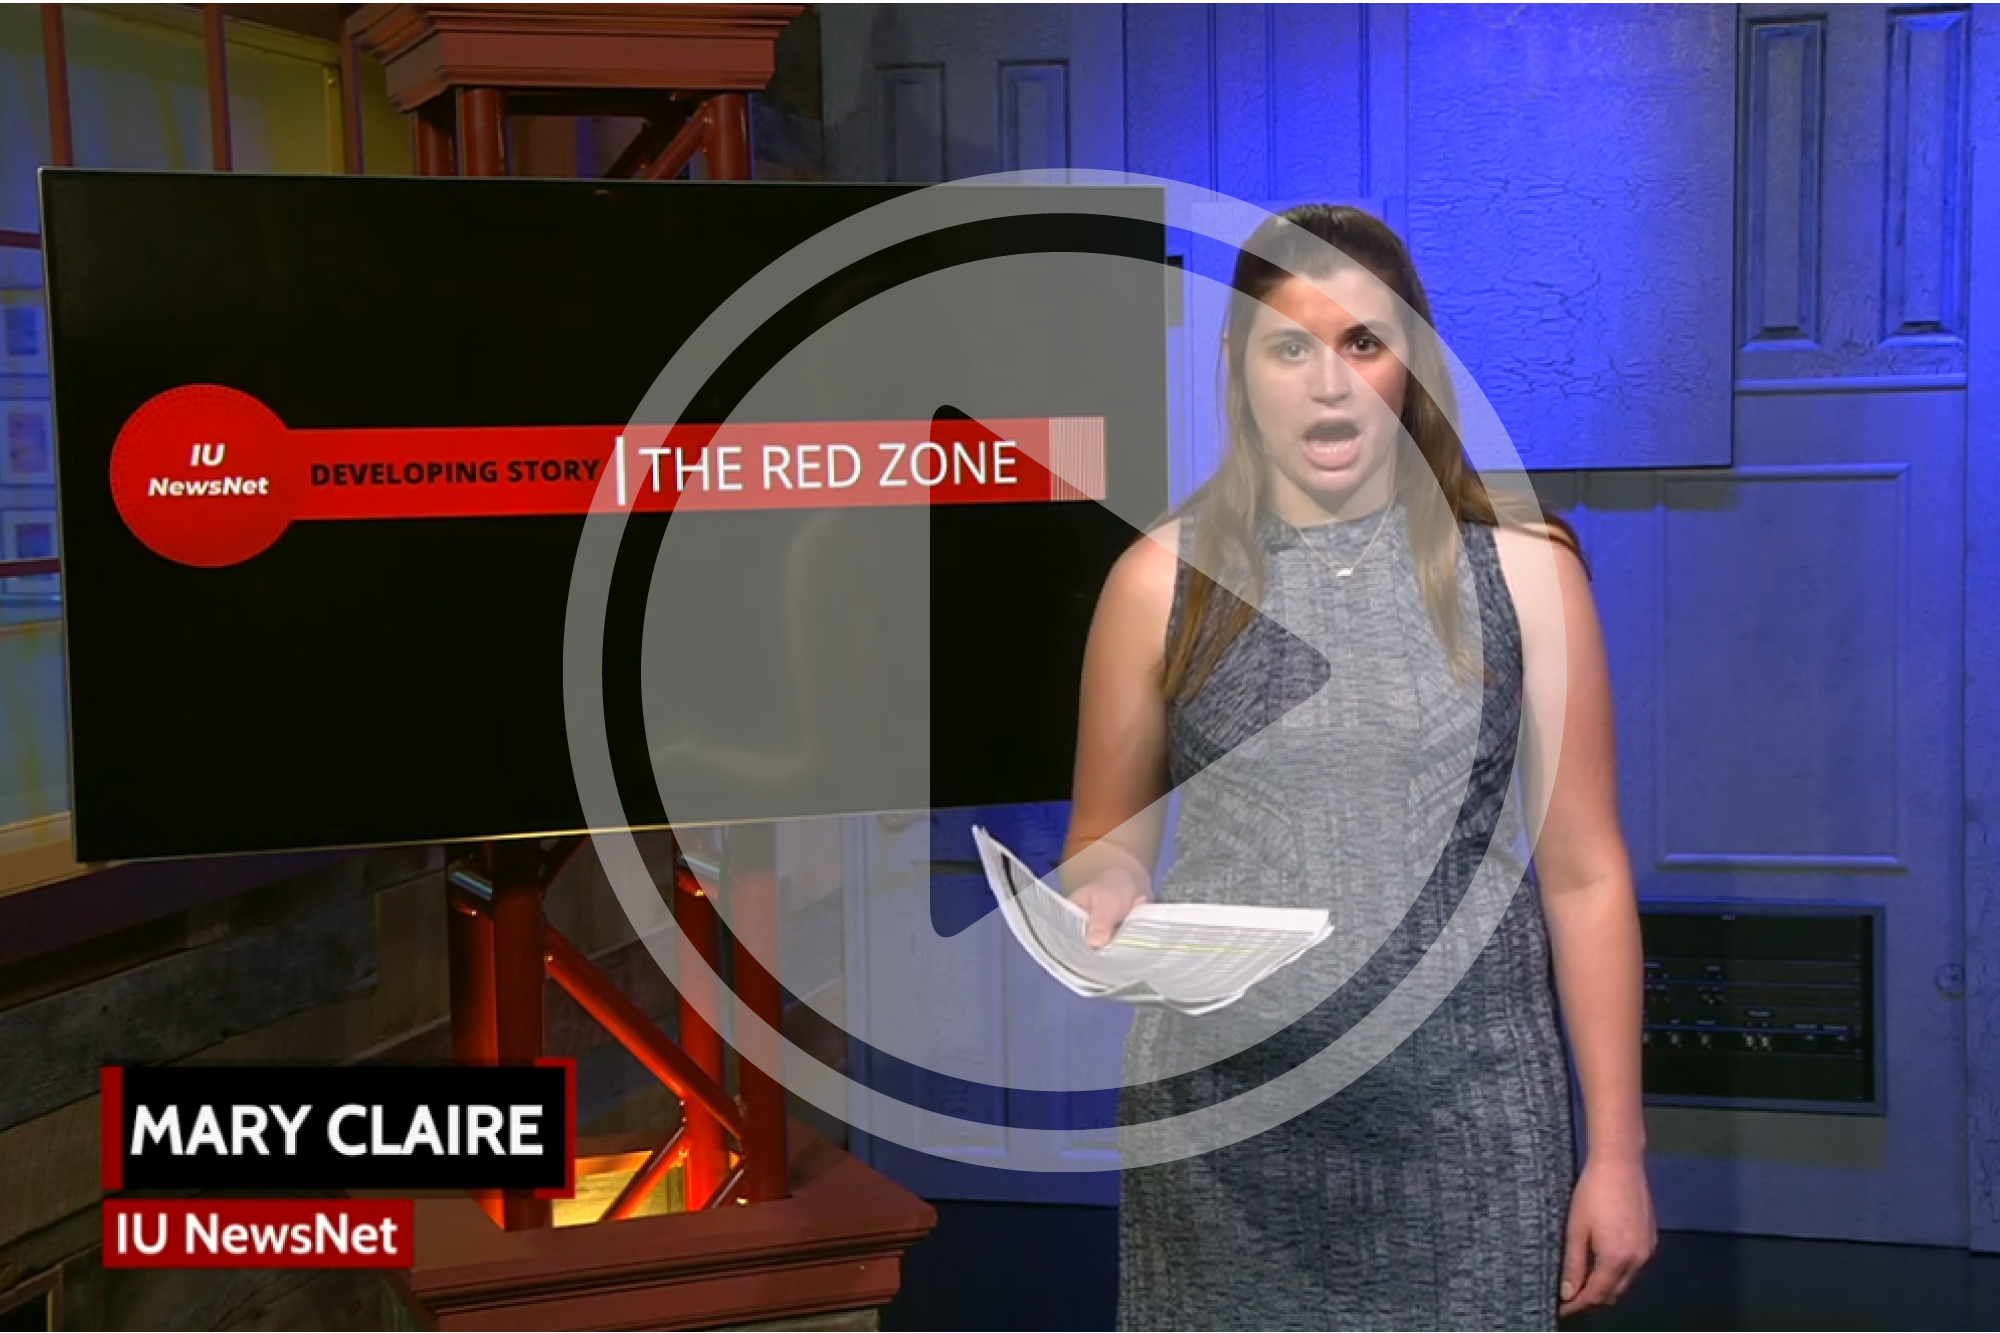 Mary Claire Molloy reporting from the Beckley Studio in front of a screen that says "IU NewsNet Developing Story: The Red Zone."